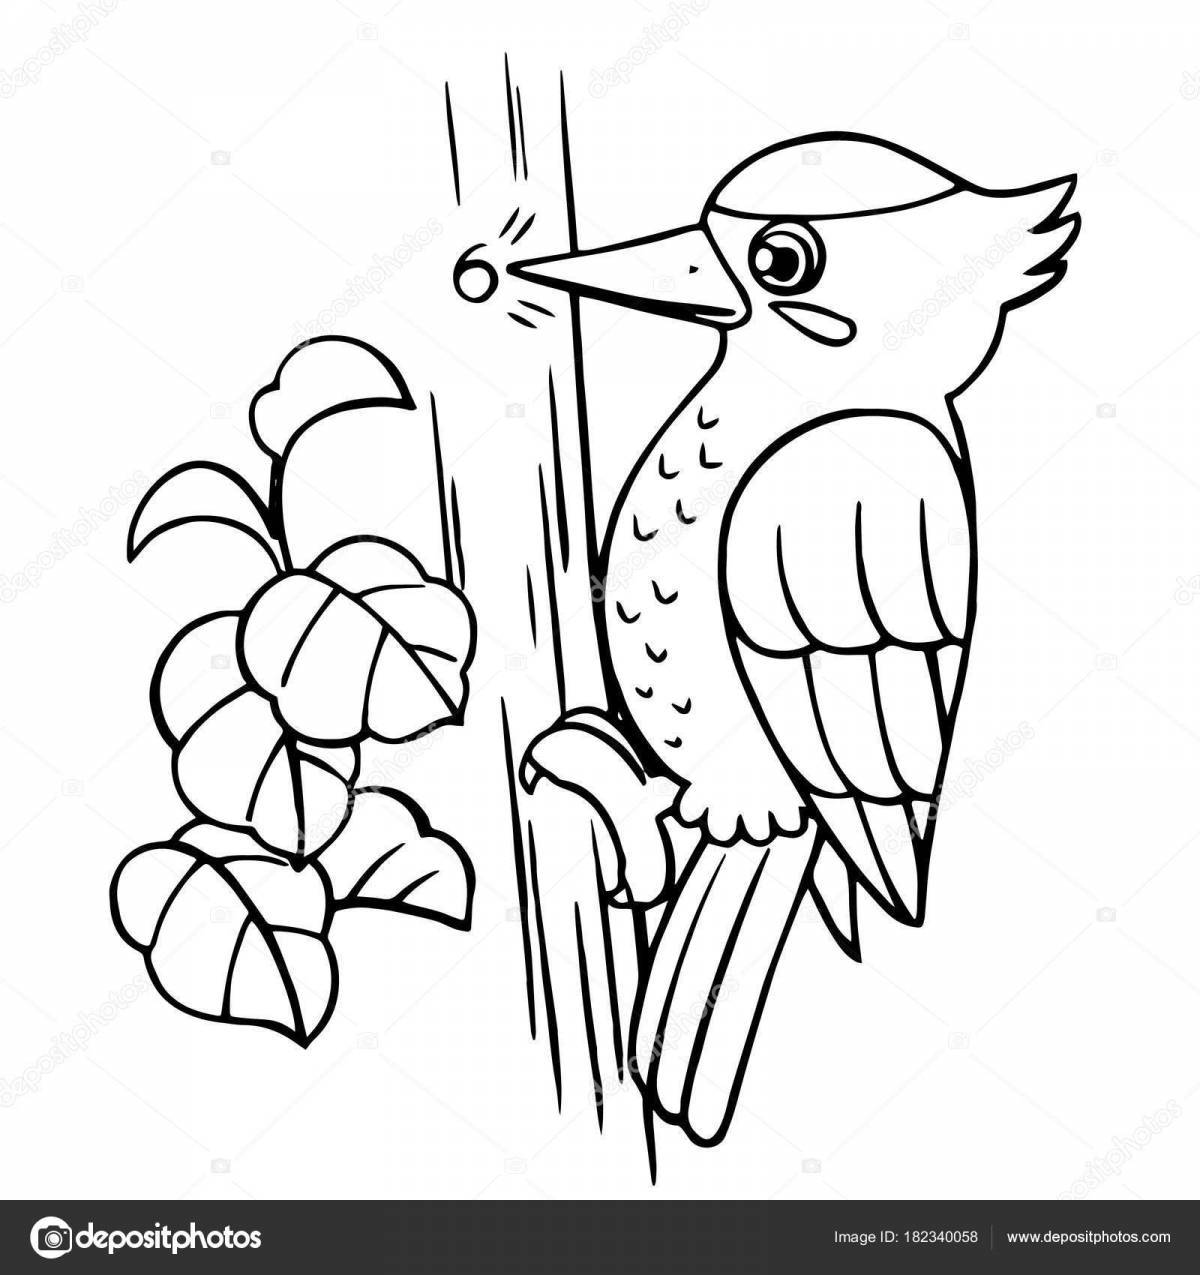 Amazing woodpecker coloring book for kids